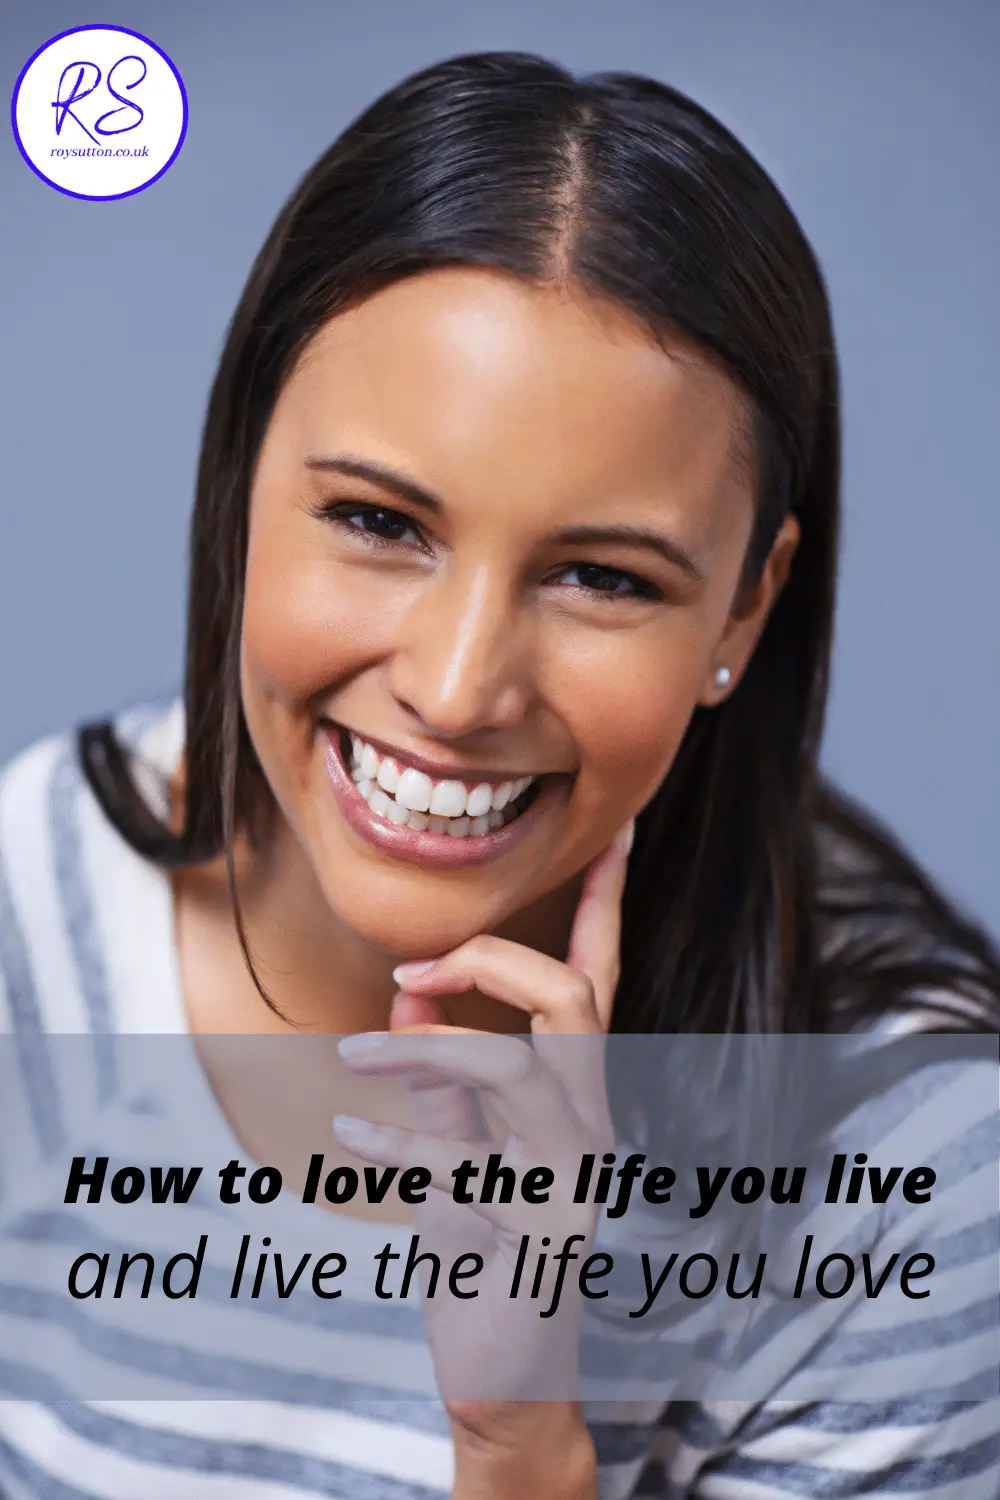 How To Love The Life You Live And Live The Life You Love Roy Sutton